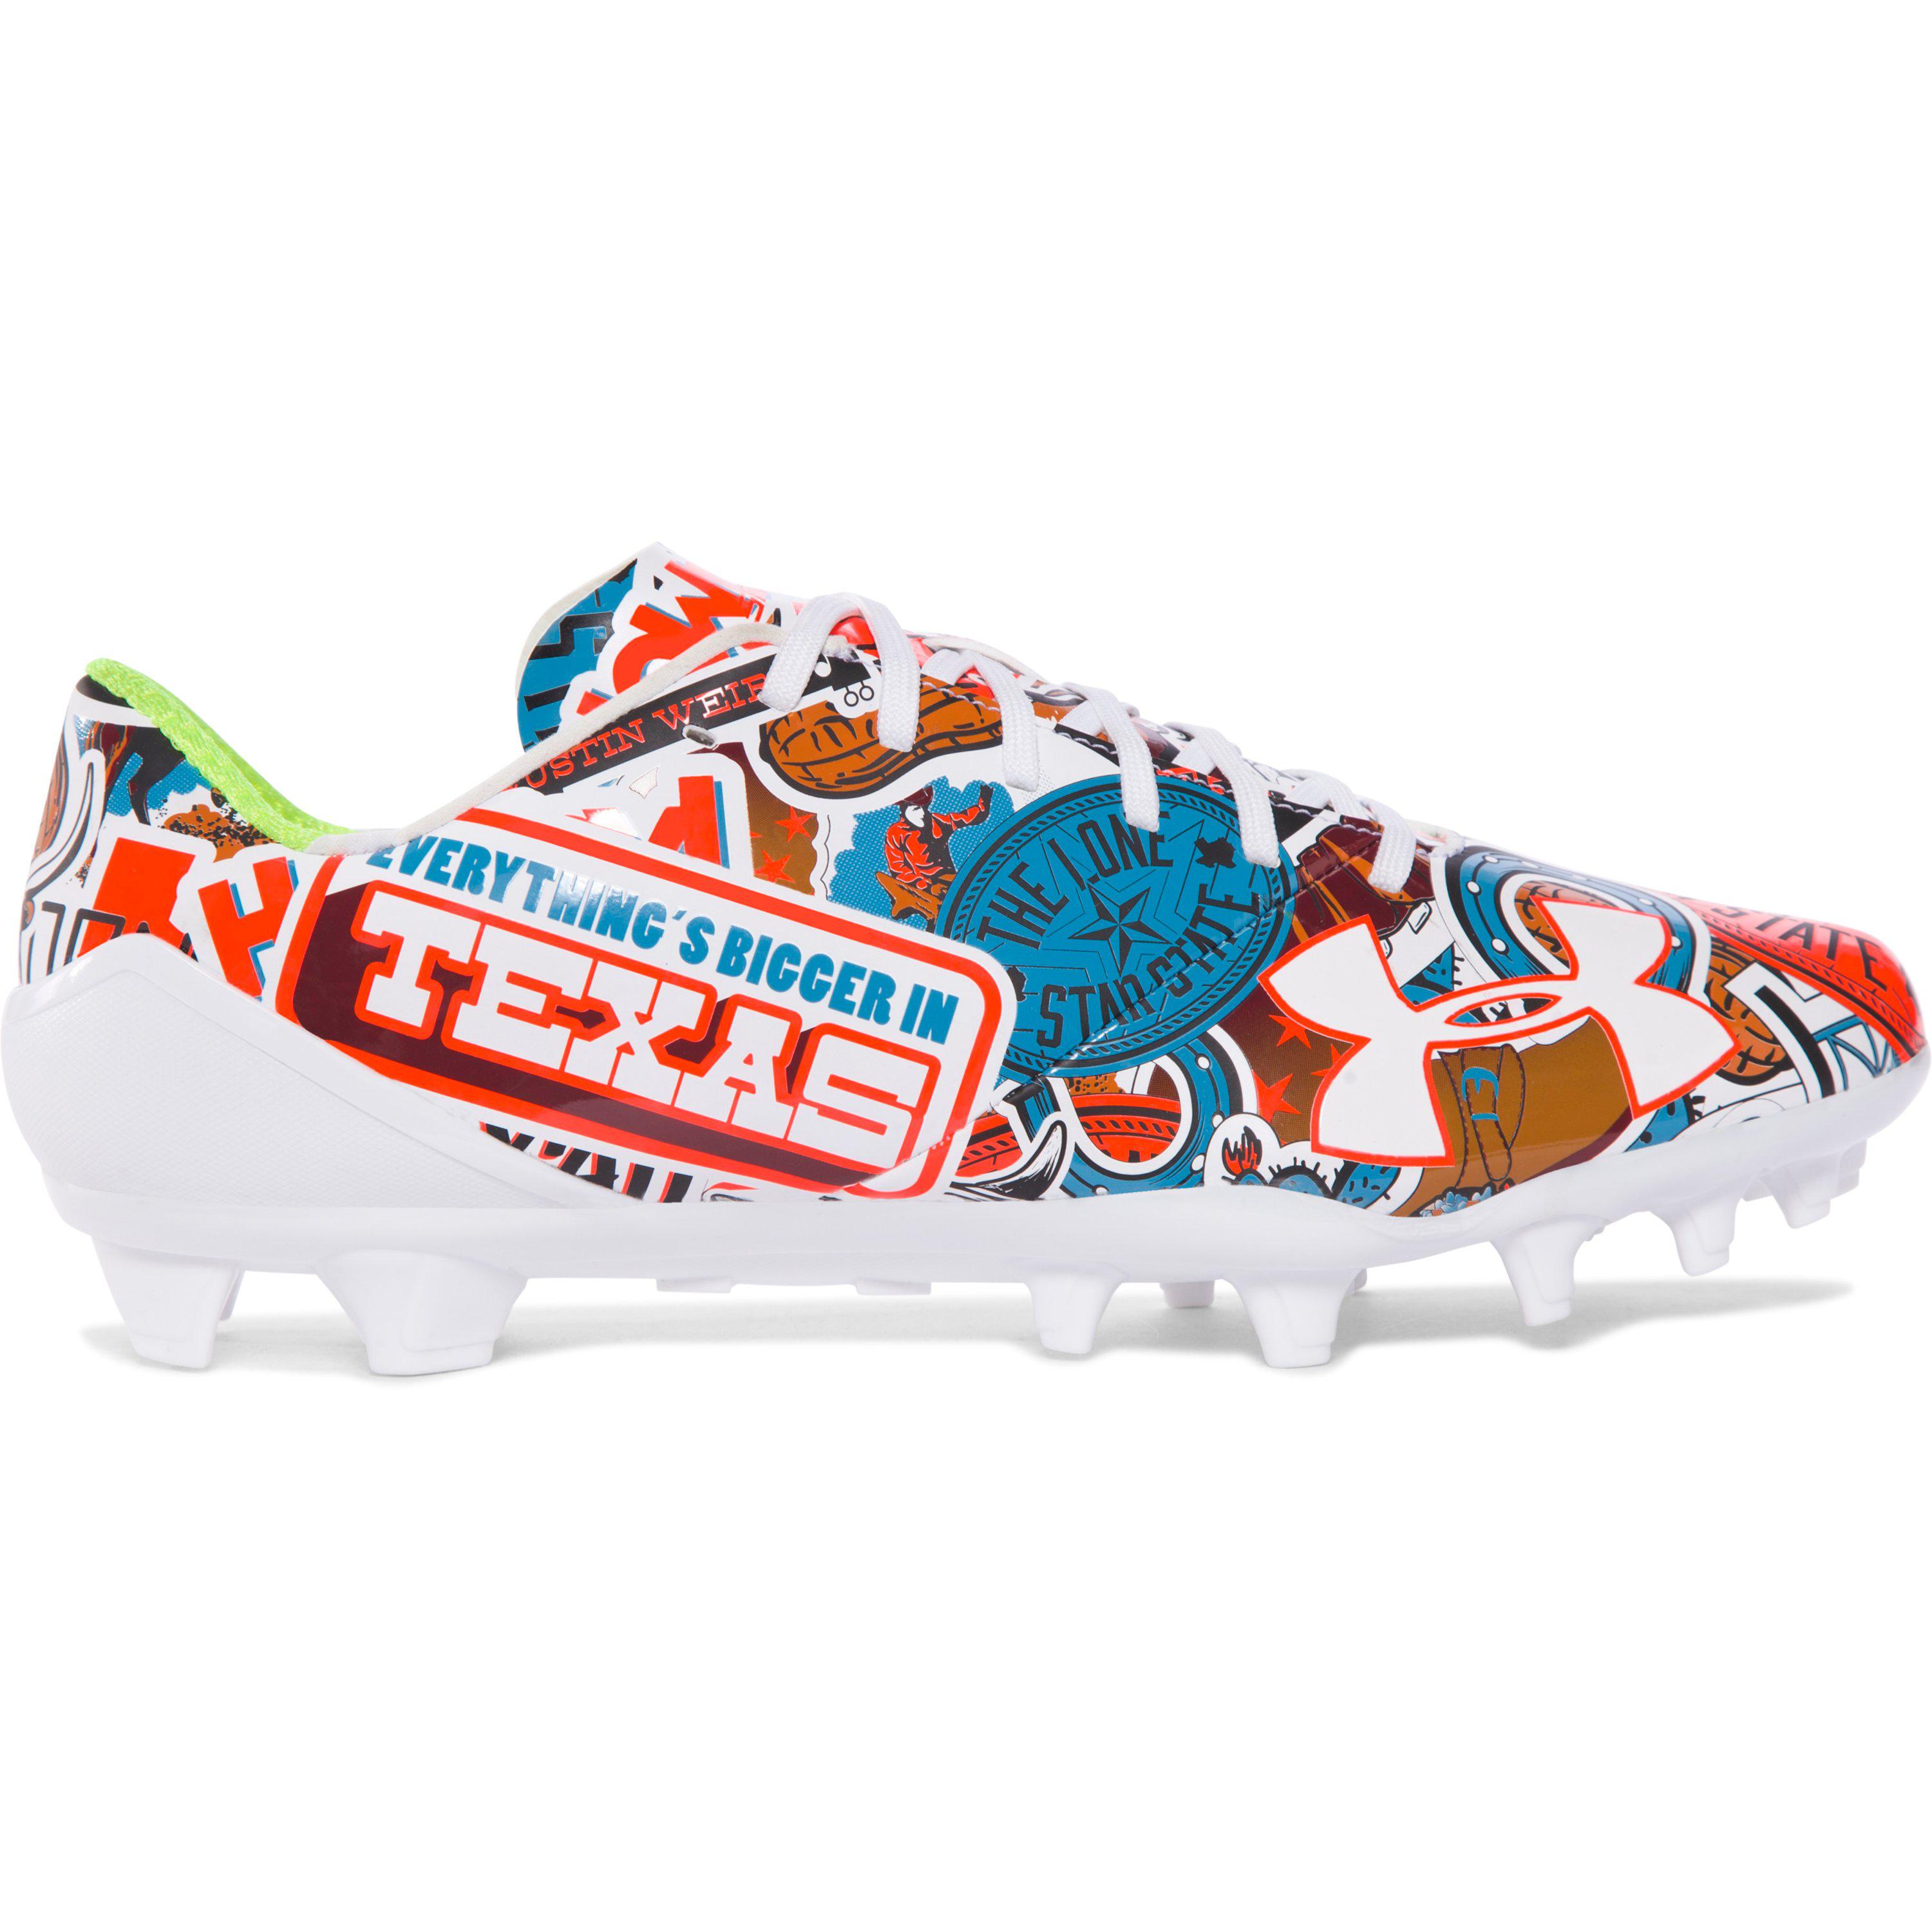 Under Armour Spotlight Mens Football Cleats AMERICA Limited Edition 1290956 076 